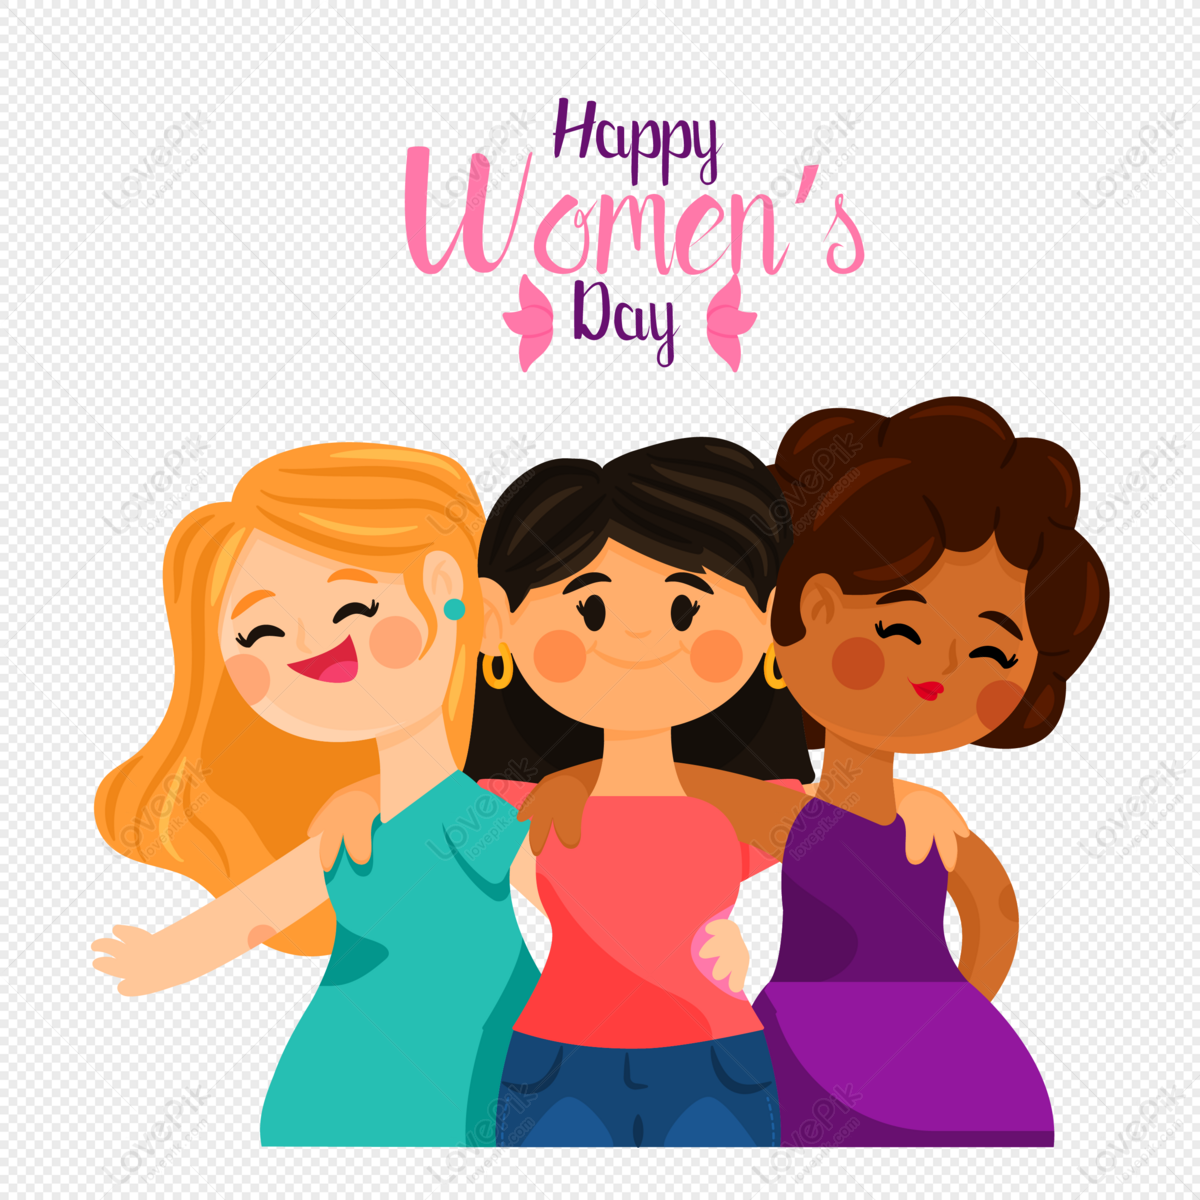 Cute Women Embrace Womens Day PNG Picture And Clipart Image For ...